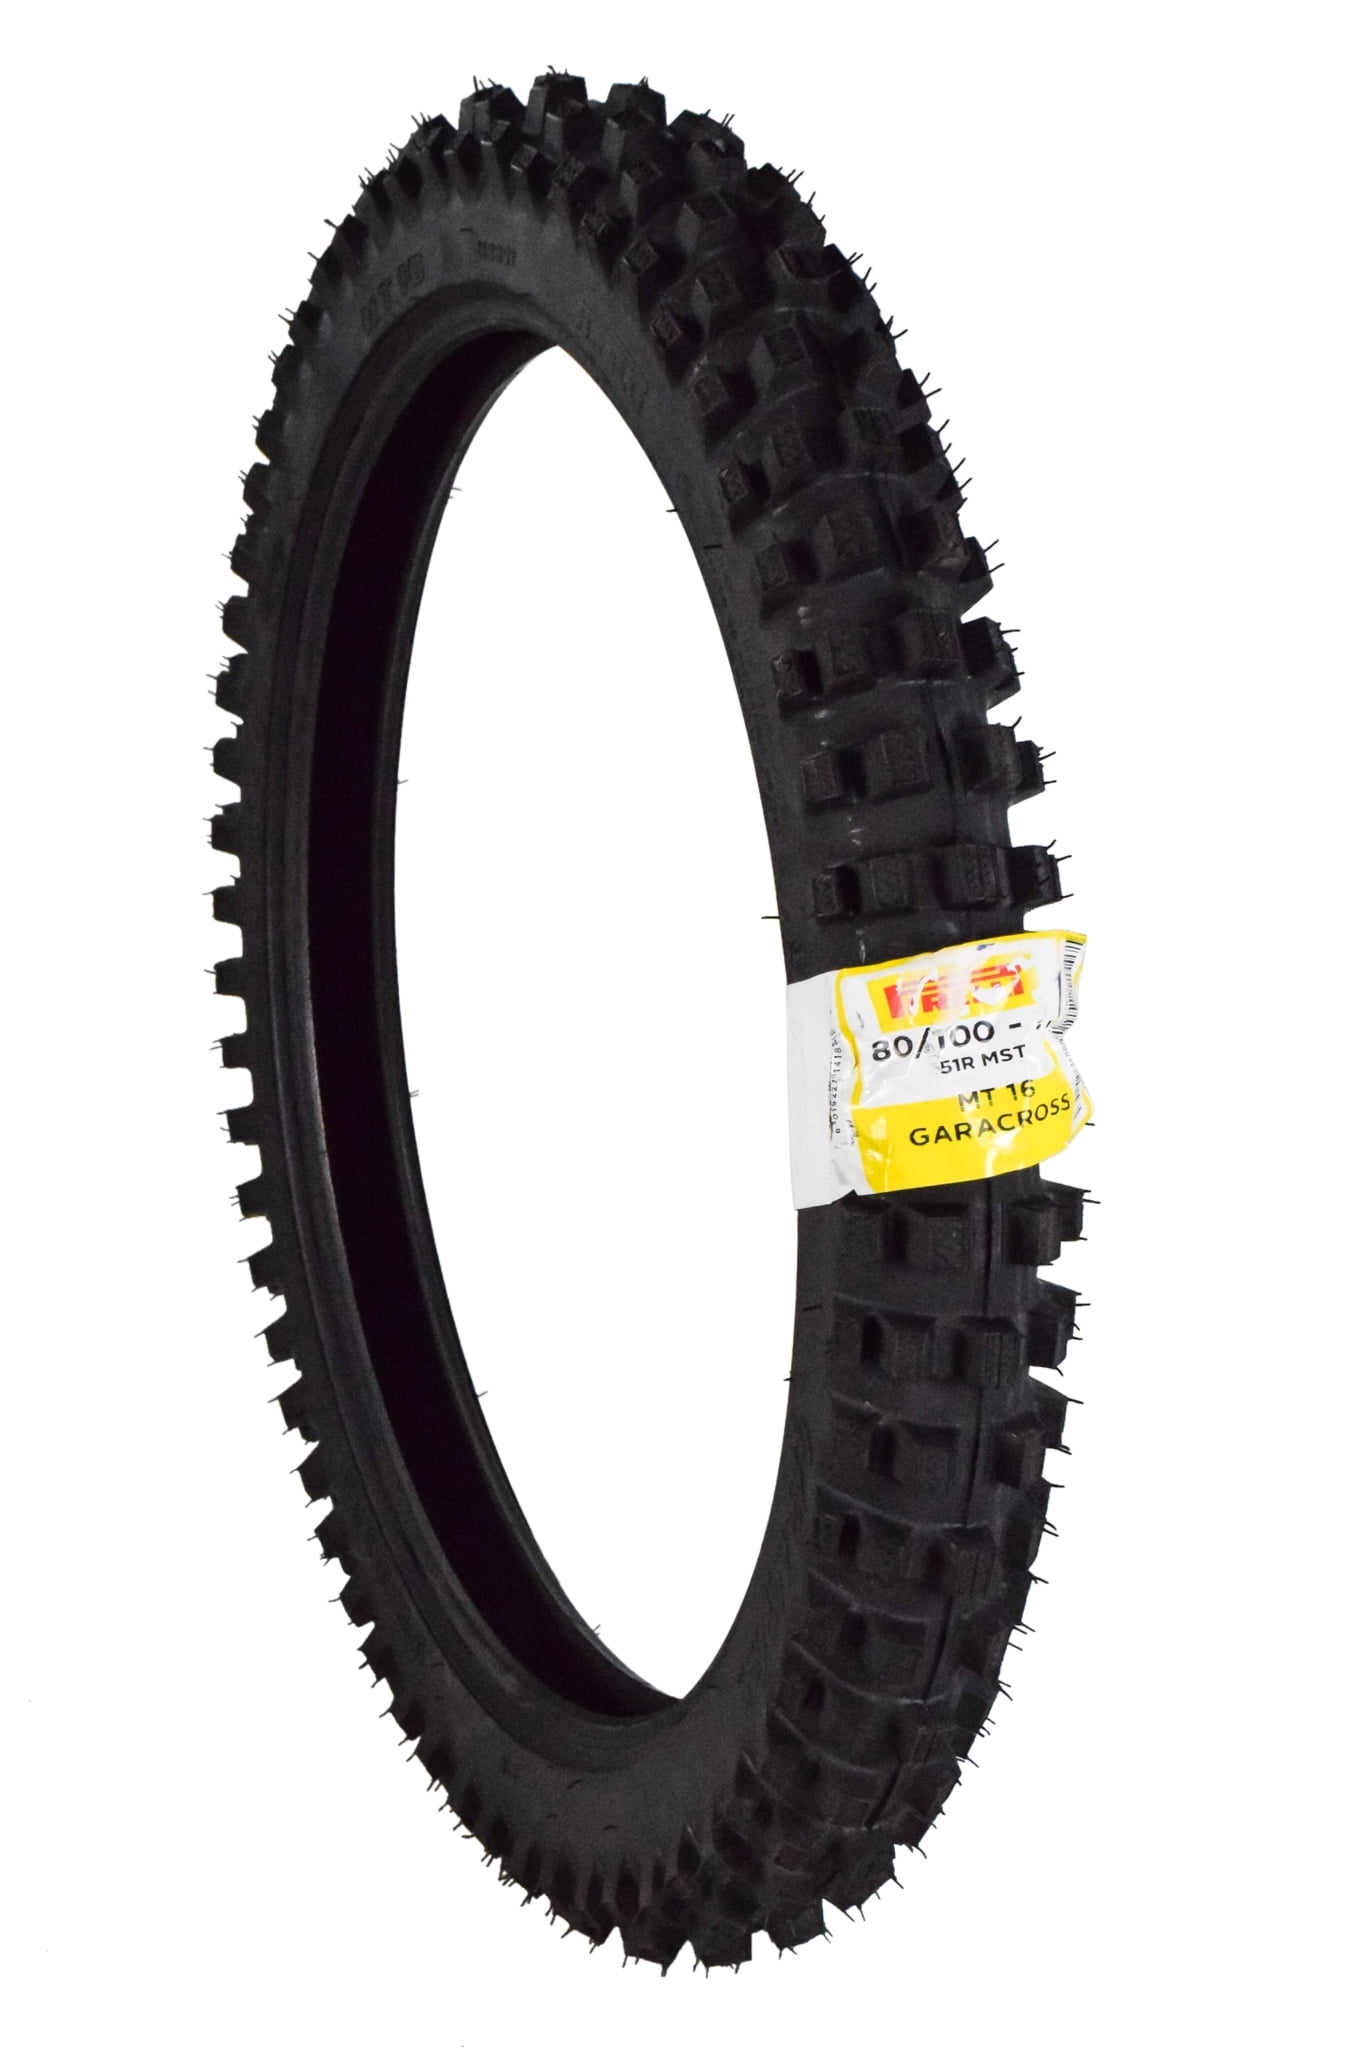 Tire Type: Offroad Size: 80/100-21 Position: Front PIVOTRAX AP102 Motocross Tire Speed Rating: M 3.00x21 Tire Application: Intermediate Rim Size: 21 Load Rating: 51 